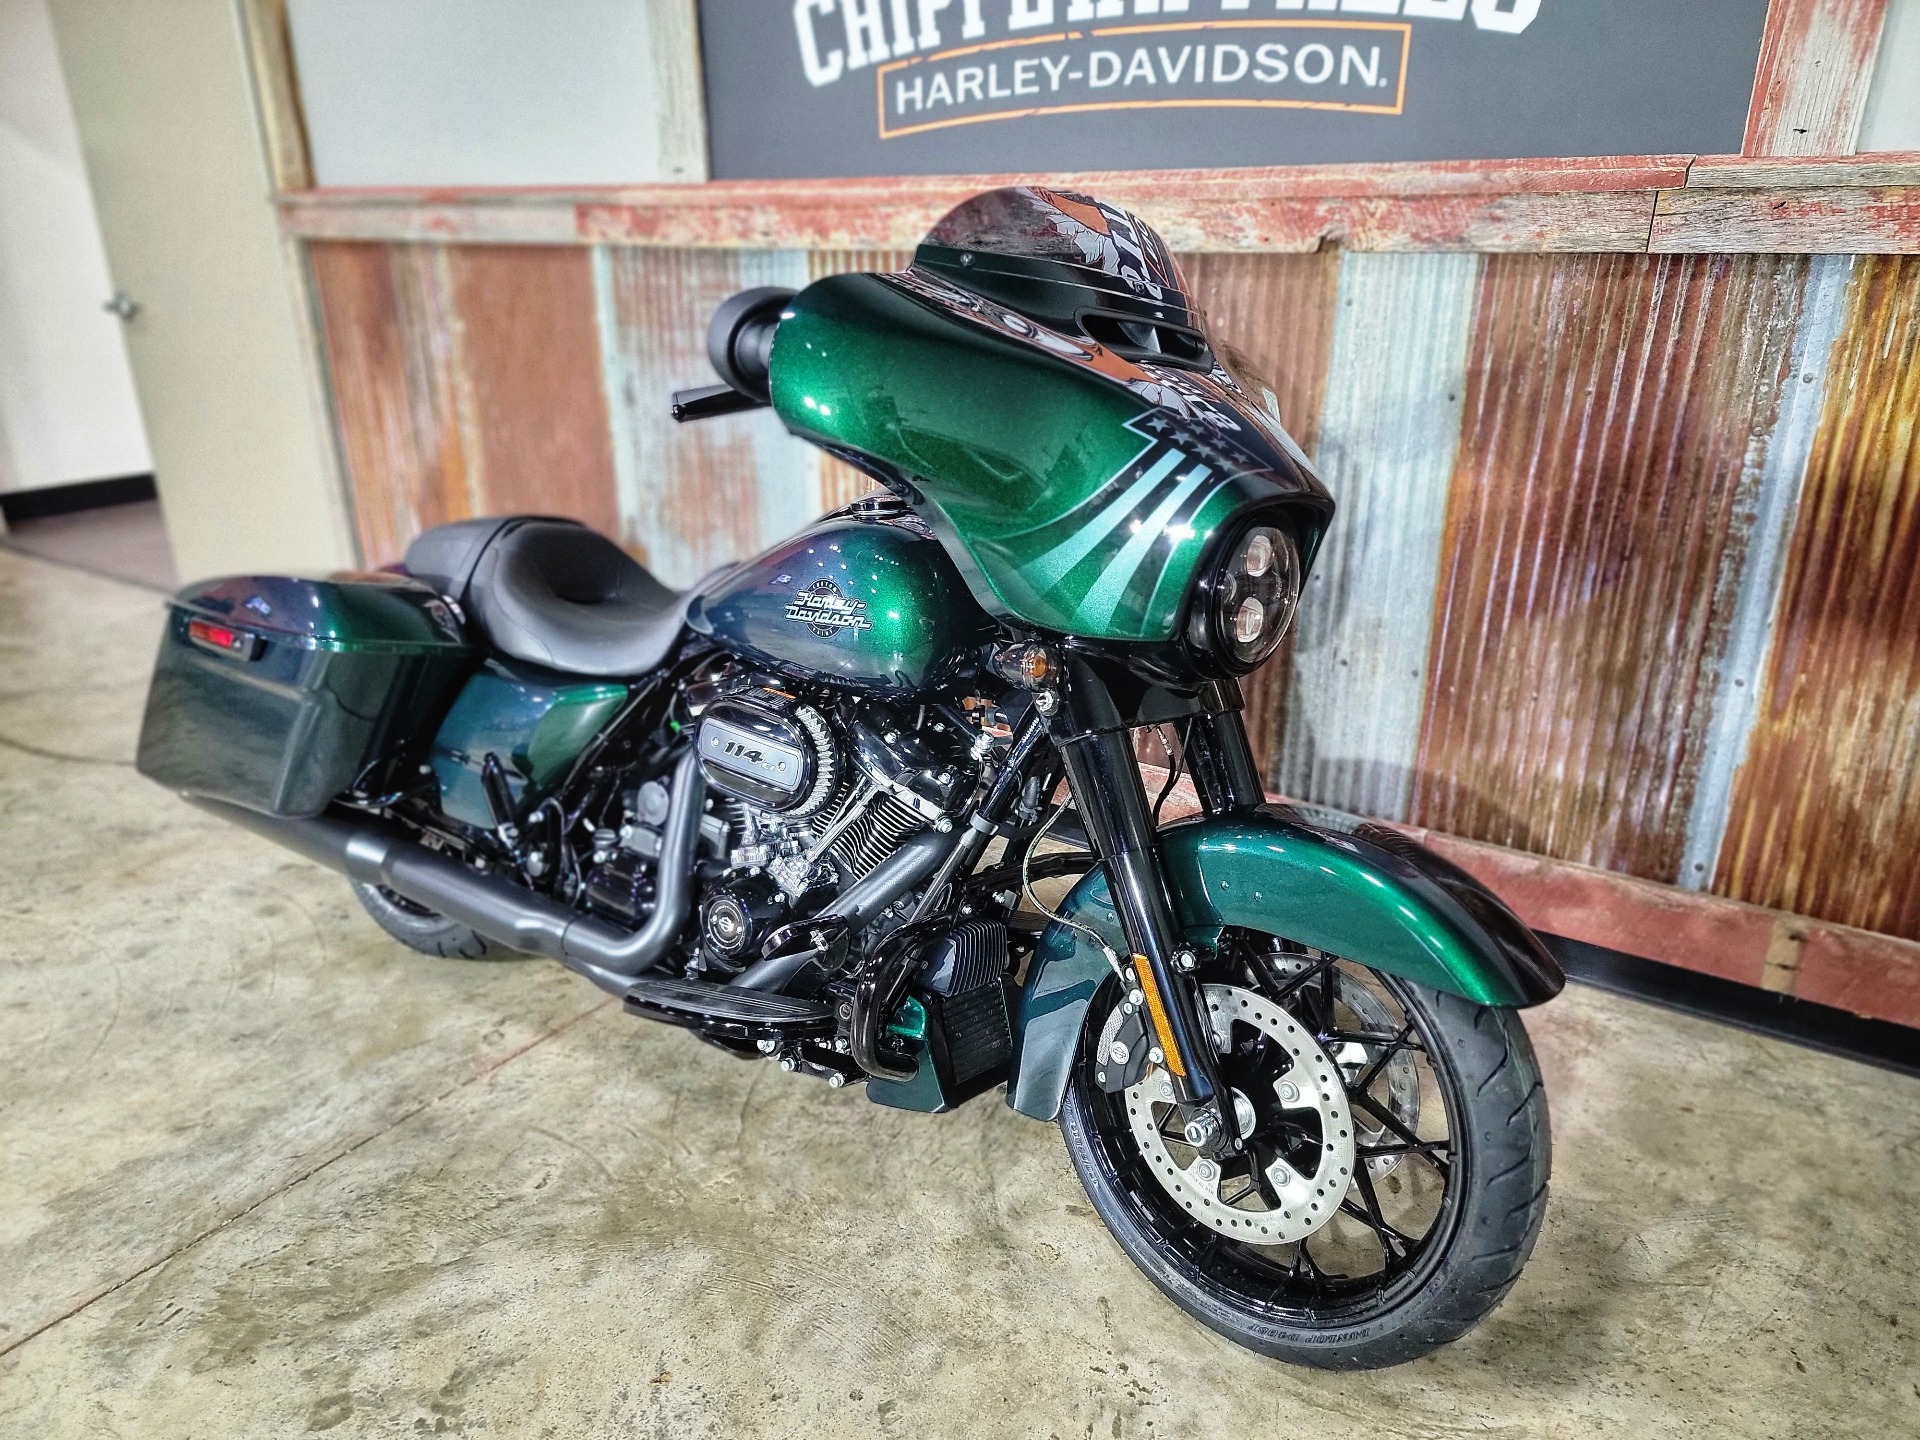 2021 Harley-Davidson Street Glide® Special in Chippewa Falls, Wisconsin - Photo 6